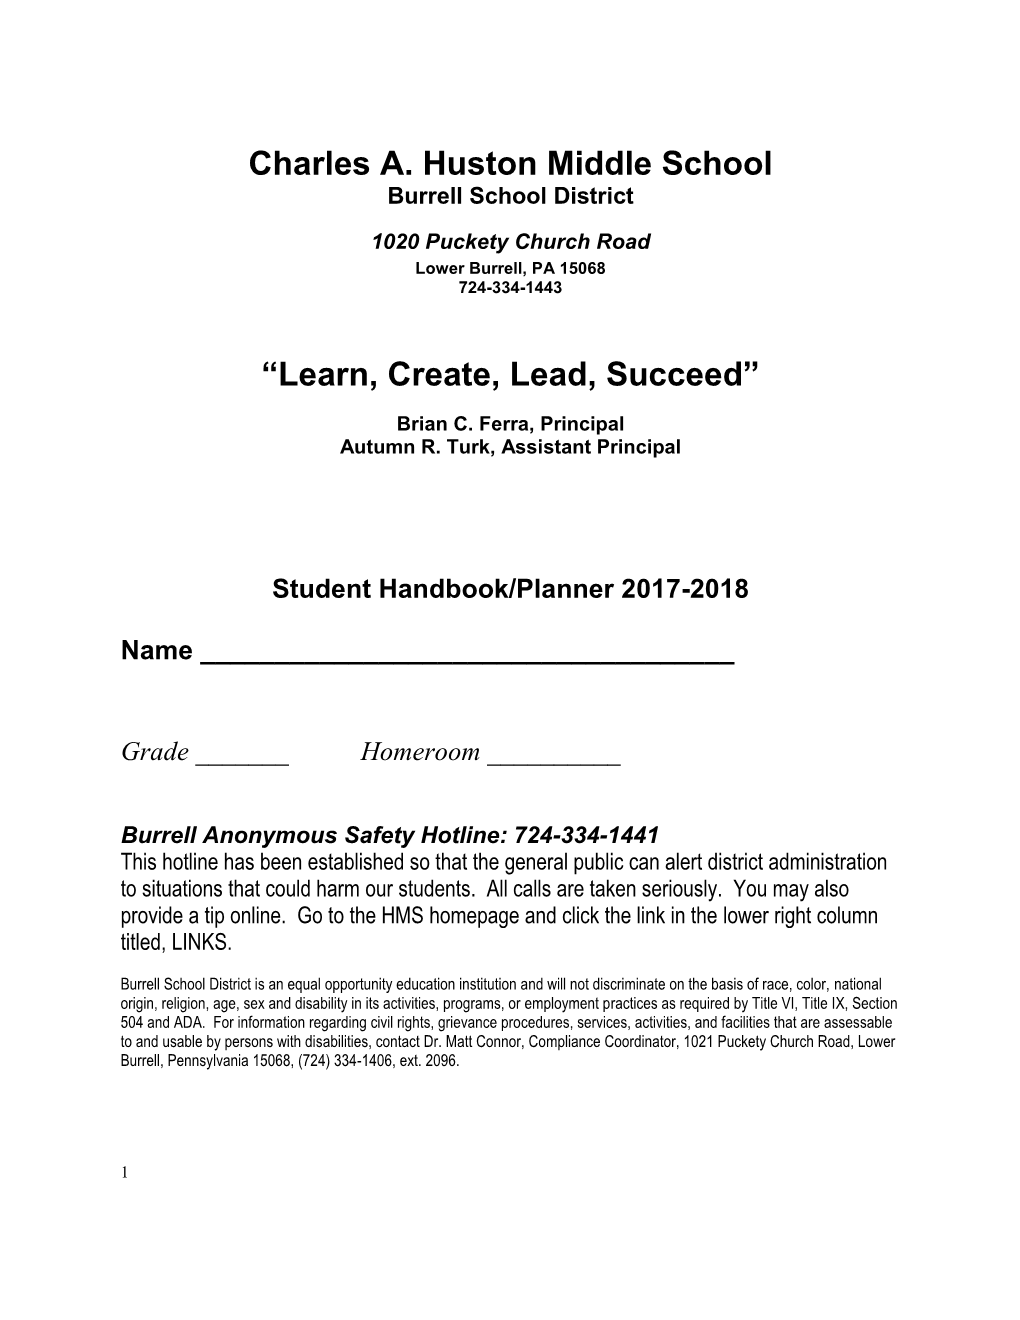 Charles A. Huston Middle School “Learn, Create, Lead, Succeed”